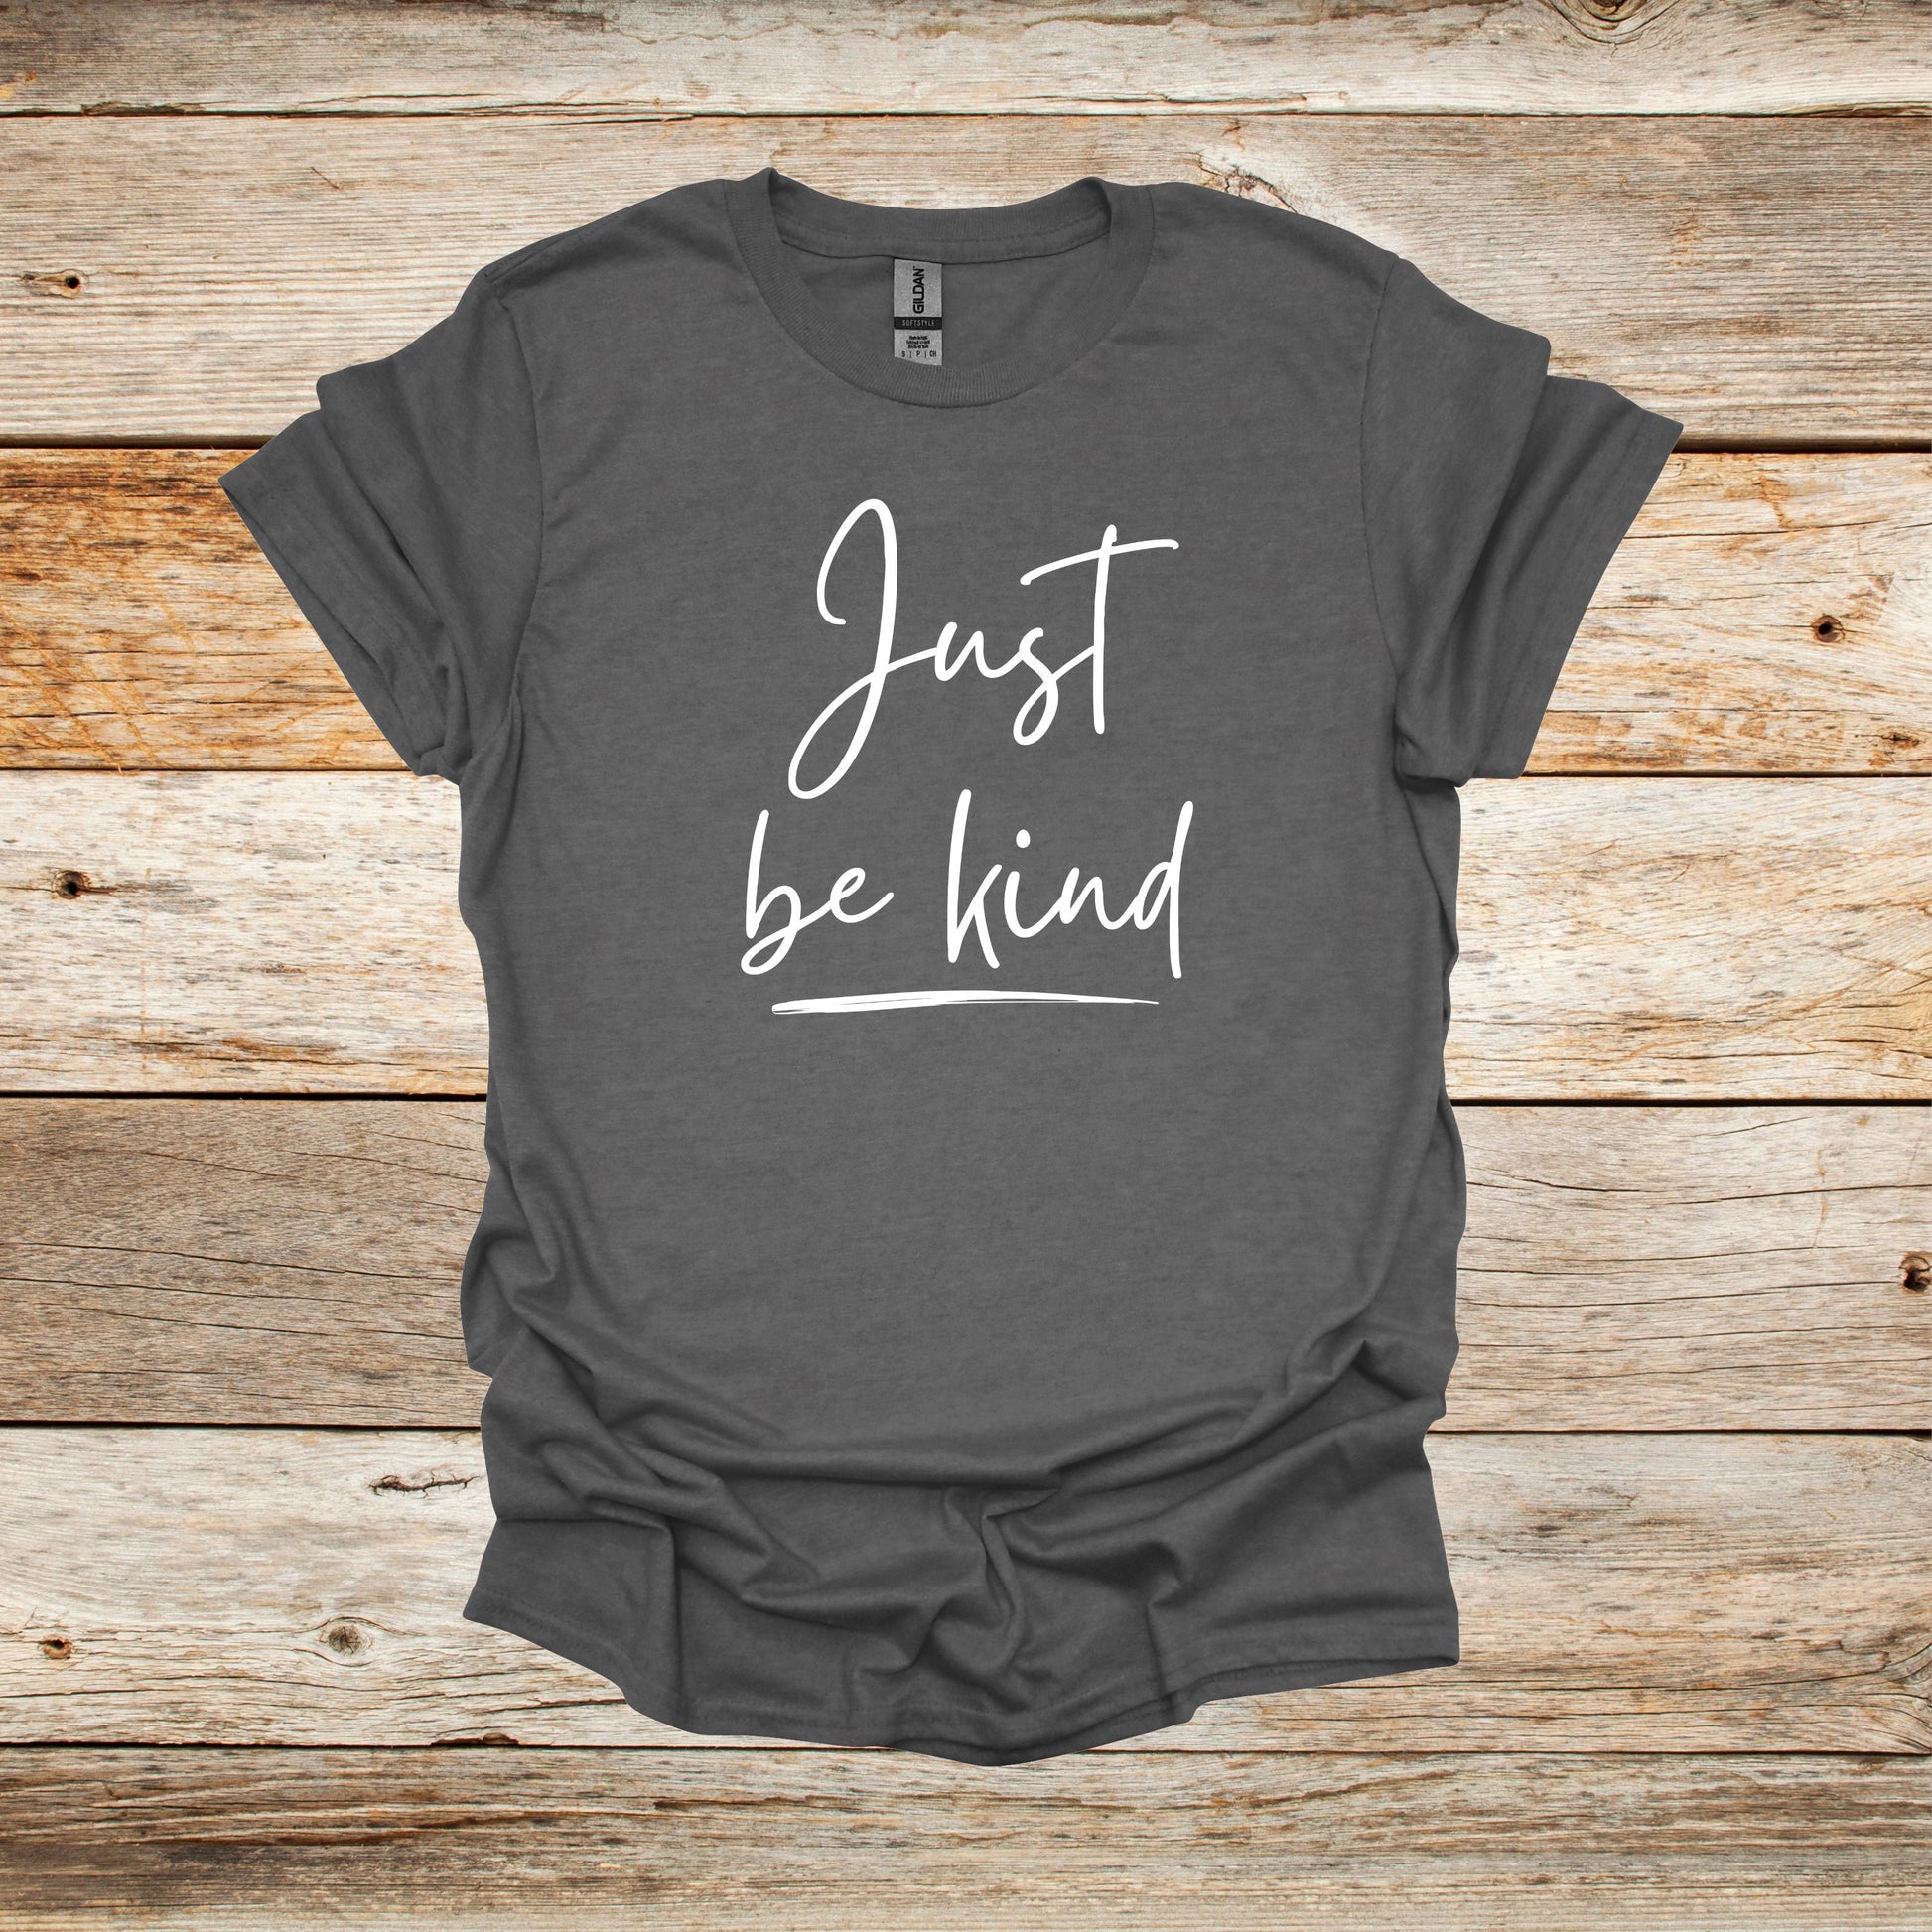 Sayings T-Shirt - Just Be Kind - Men's and Women's Tee Shirts - Sayings T-Shirts Graphic Avenue Graphite Heather Adult Small 